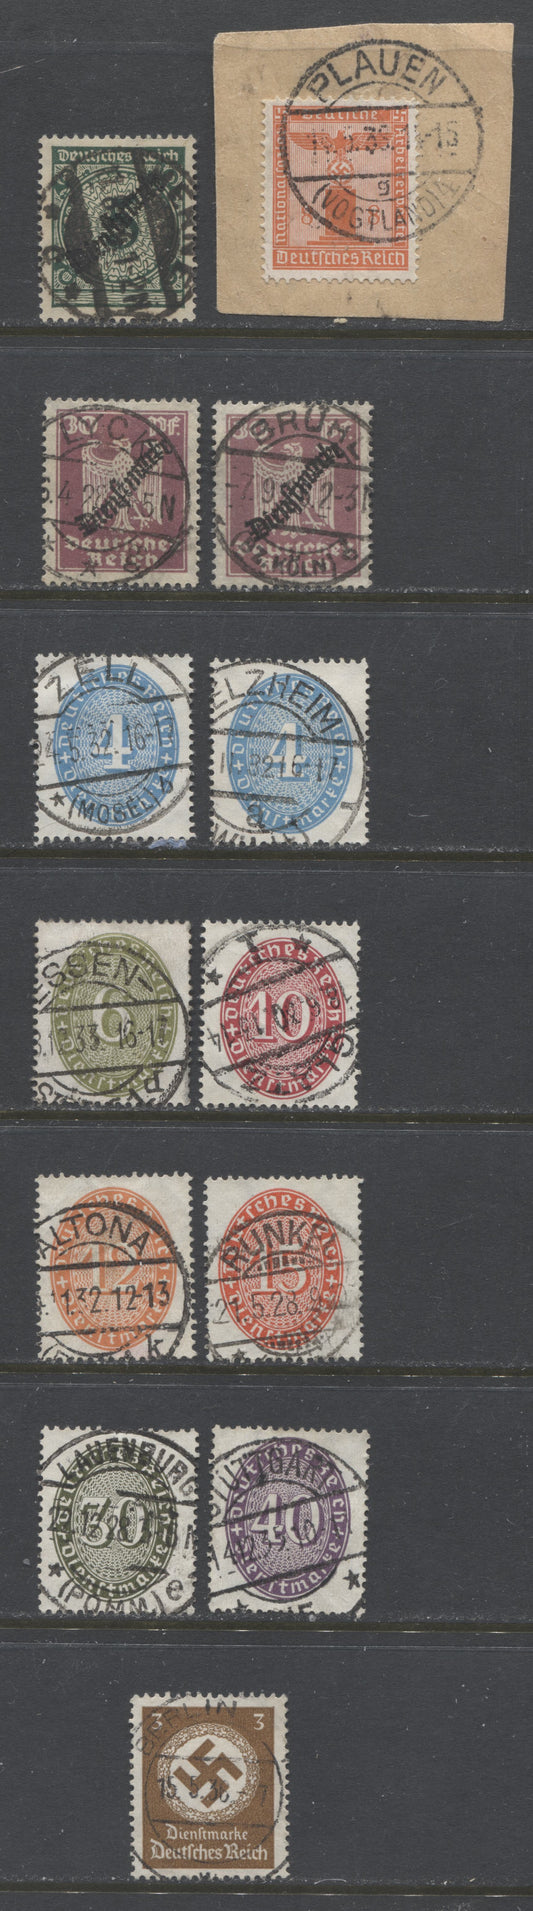 Lot 461 Germany SC#O48/S6 1923-1938 Official Overprints & Franchise Stamps, All With SON Town Cancels, 13 VF Used Singles, Click on Listing to See ALL Pictures, 2022 Scott Classic Cat. $17.15